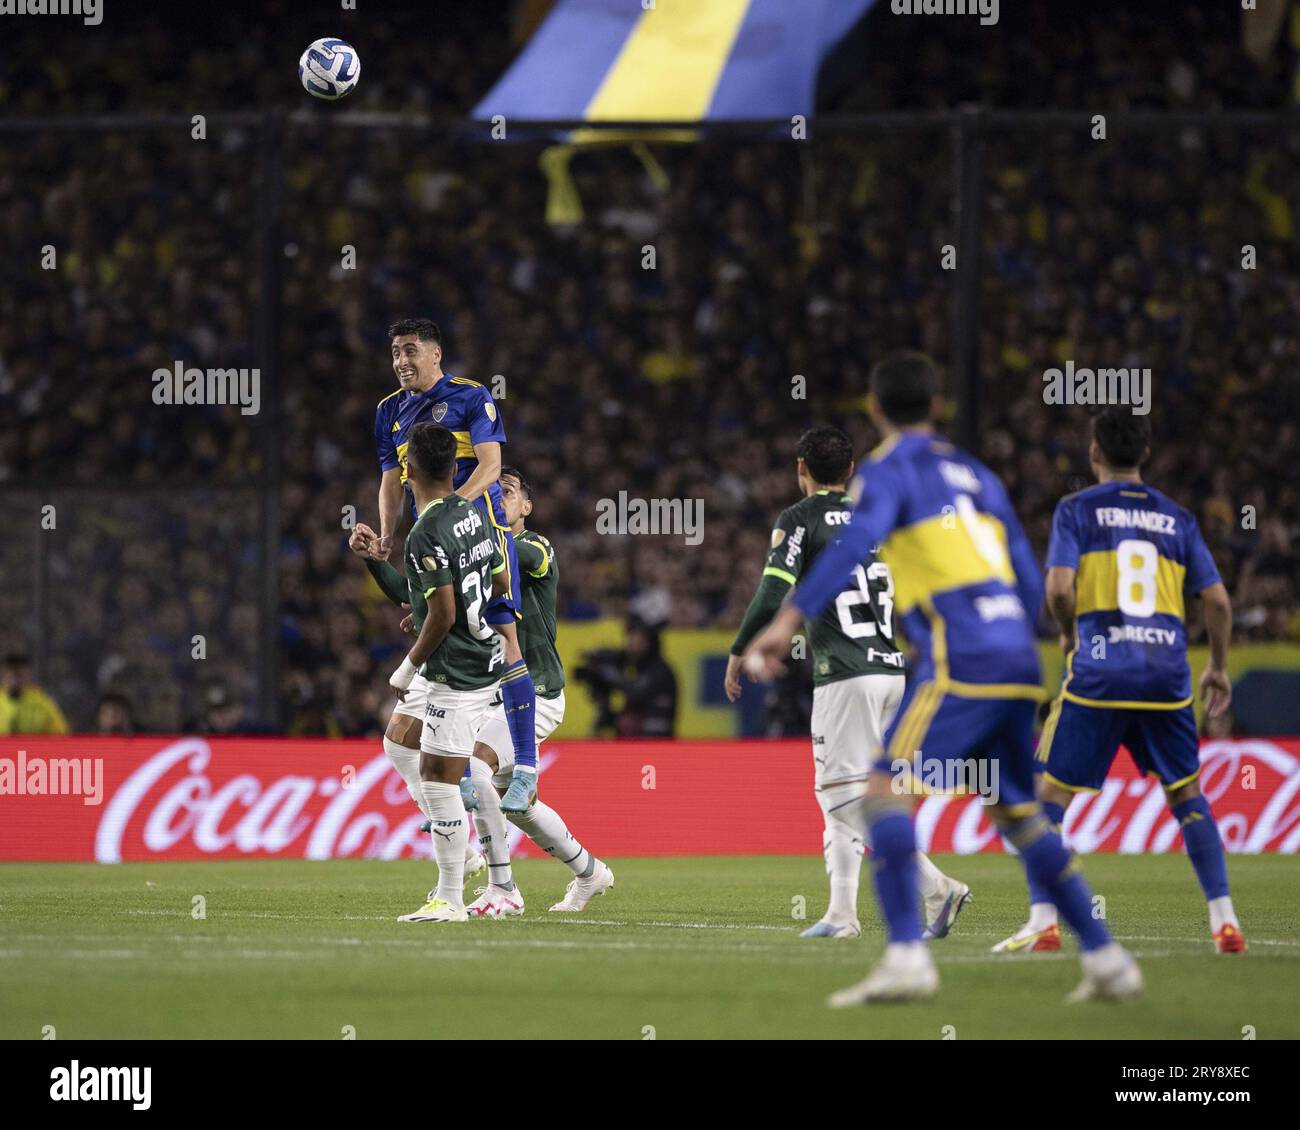 Buenos Aires, Argentina. 11th Mar, 2023. BUENOS AIRES, ARGENTINA - SEPTEMBER 28: Merentiel fights for the ball during the match between Boca Juniors and Palmeiras as part of semi-finals of the CONMEBOL Libertadores at Alberto J. Armando Stadium (La Bombonera) on September 28, 2023 in Buenos Aires, Argentina. (Photo by Marco Galvao/Pximages) Credit: Px Images/Alamy Live News Stock Photo